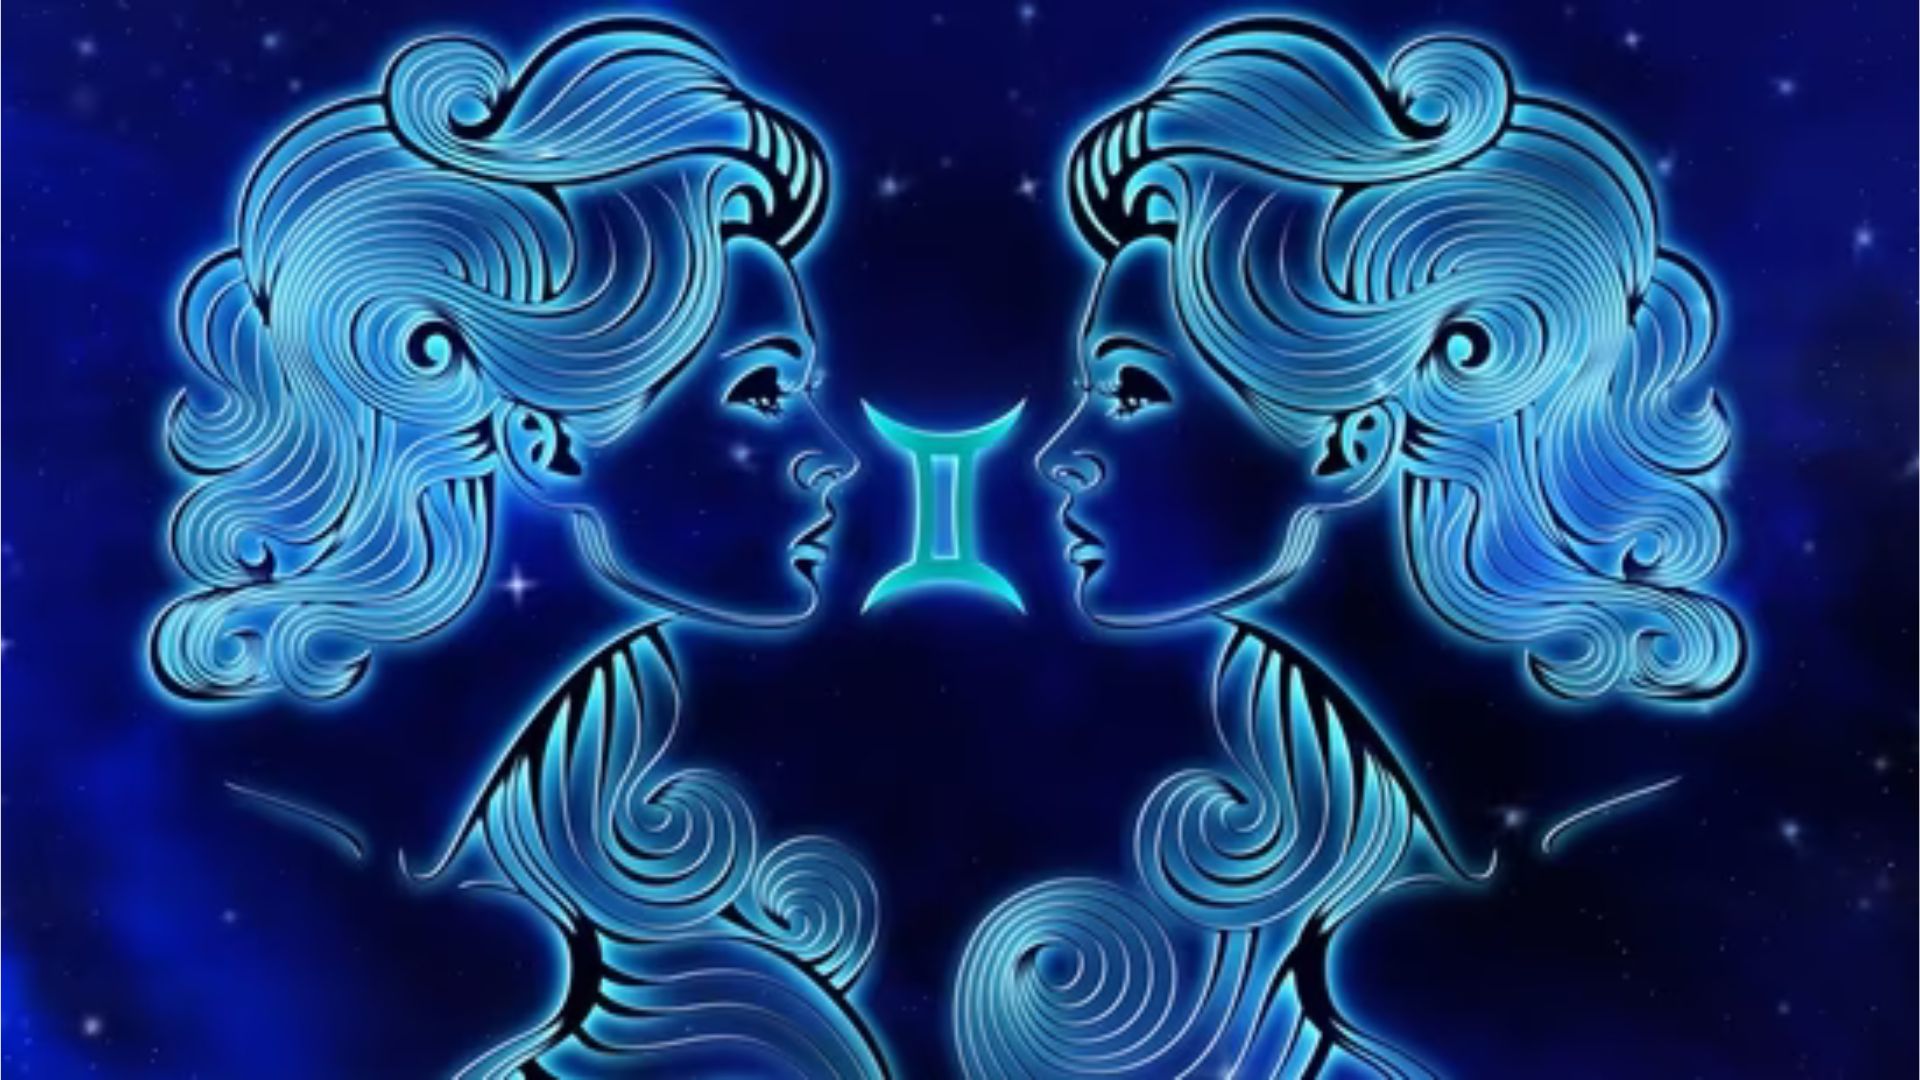 Gemini Sign Between Two Women Face to Face